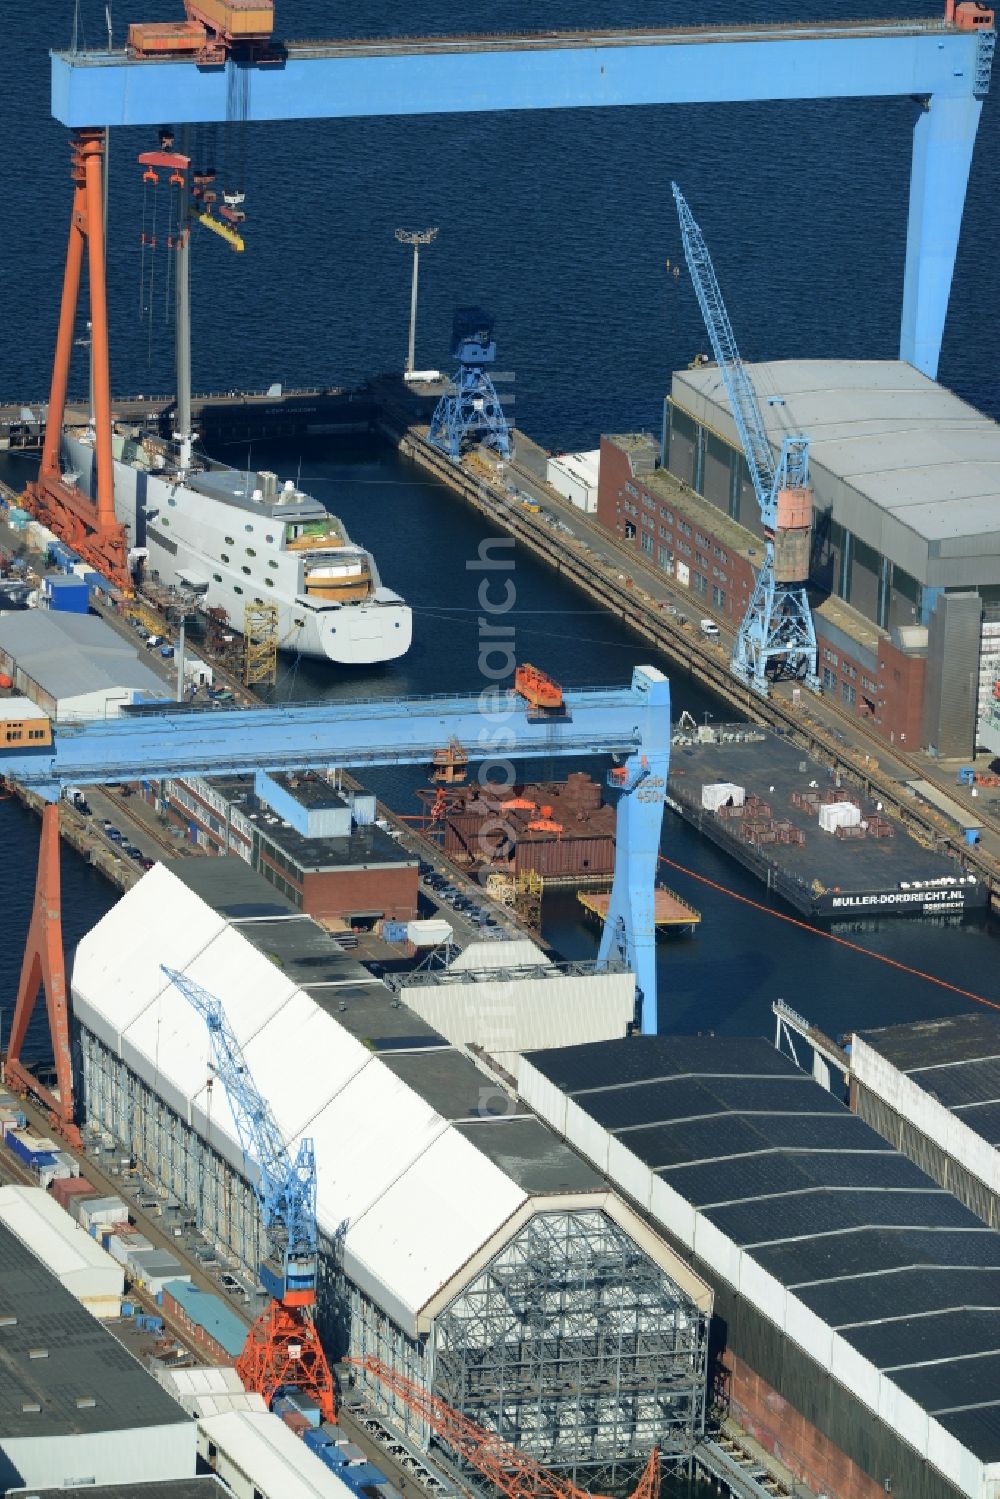 Aerial image Kiel - Dock 8 of the ThyssenKrupp Marine Systems GmbH company in Kiel in the state of Schleswig-Holstein. The site with the blue cranes is primarily used for the production of submarines